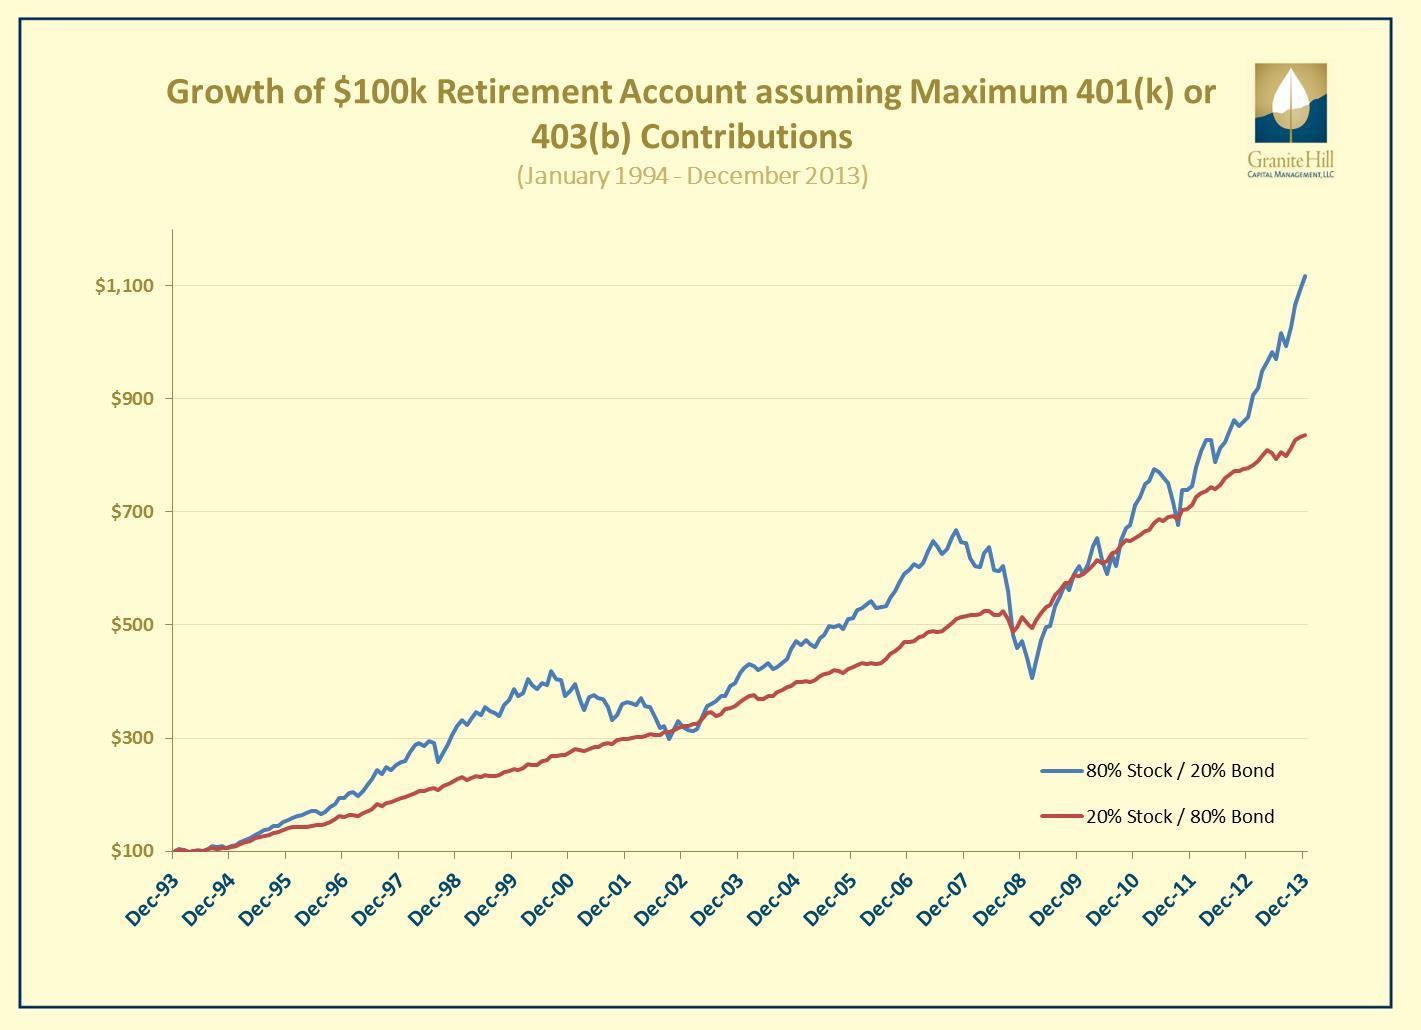 Growth of $100k Retirement Account over 20 years assuming Maximum Contributions